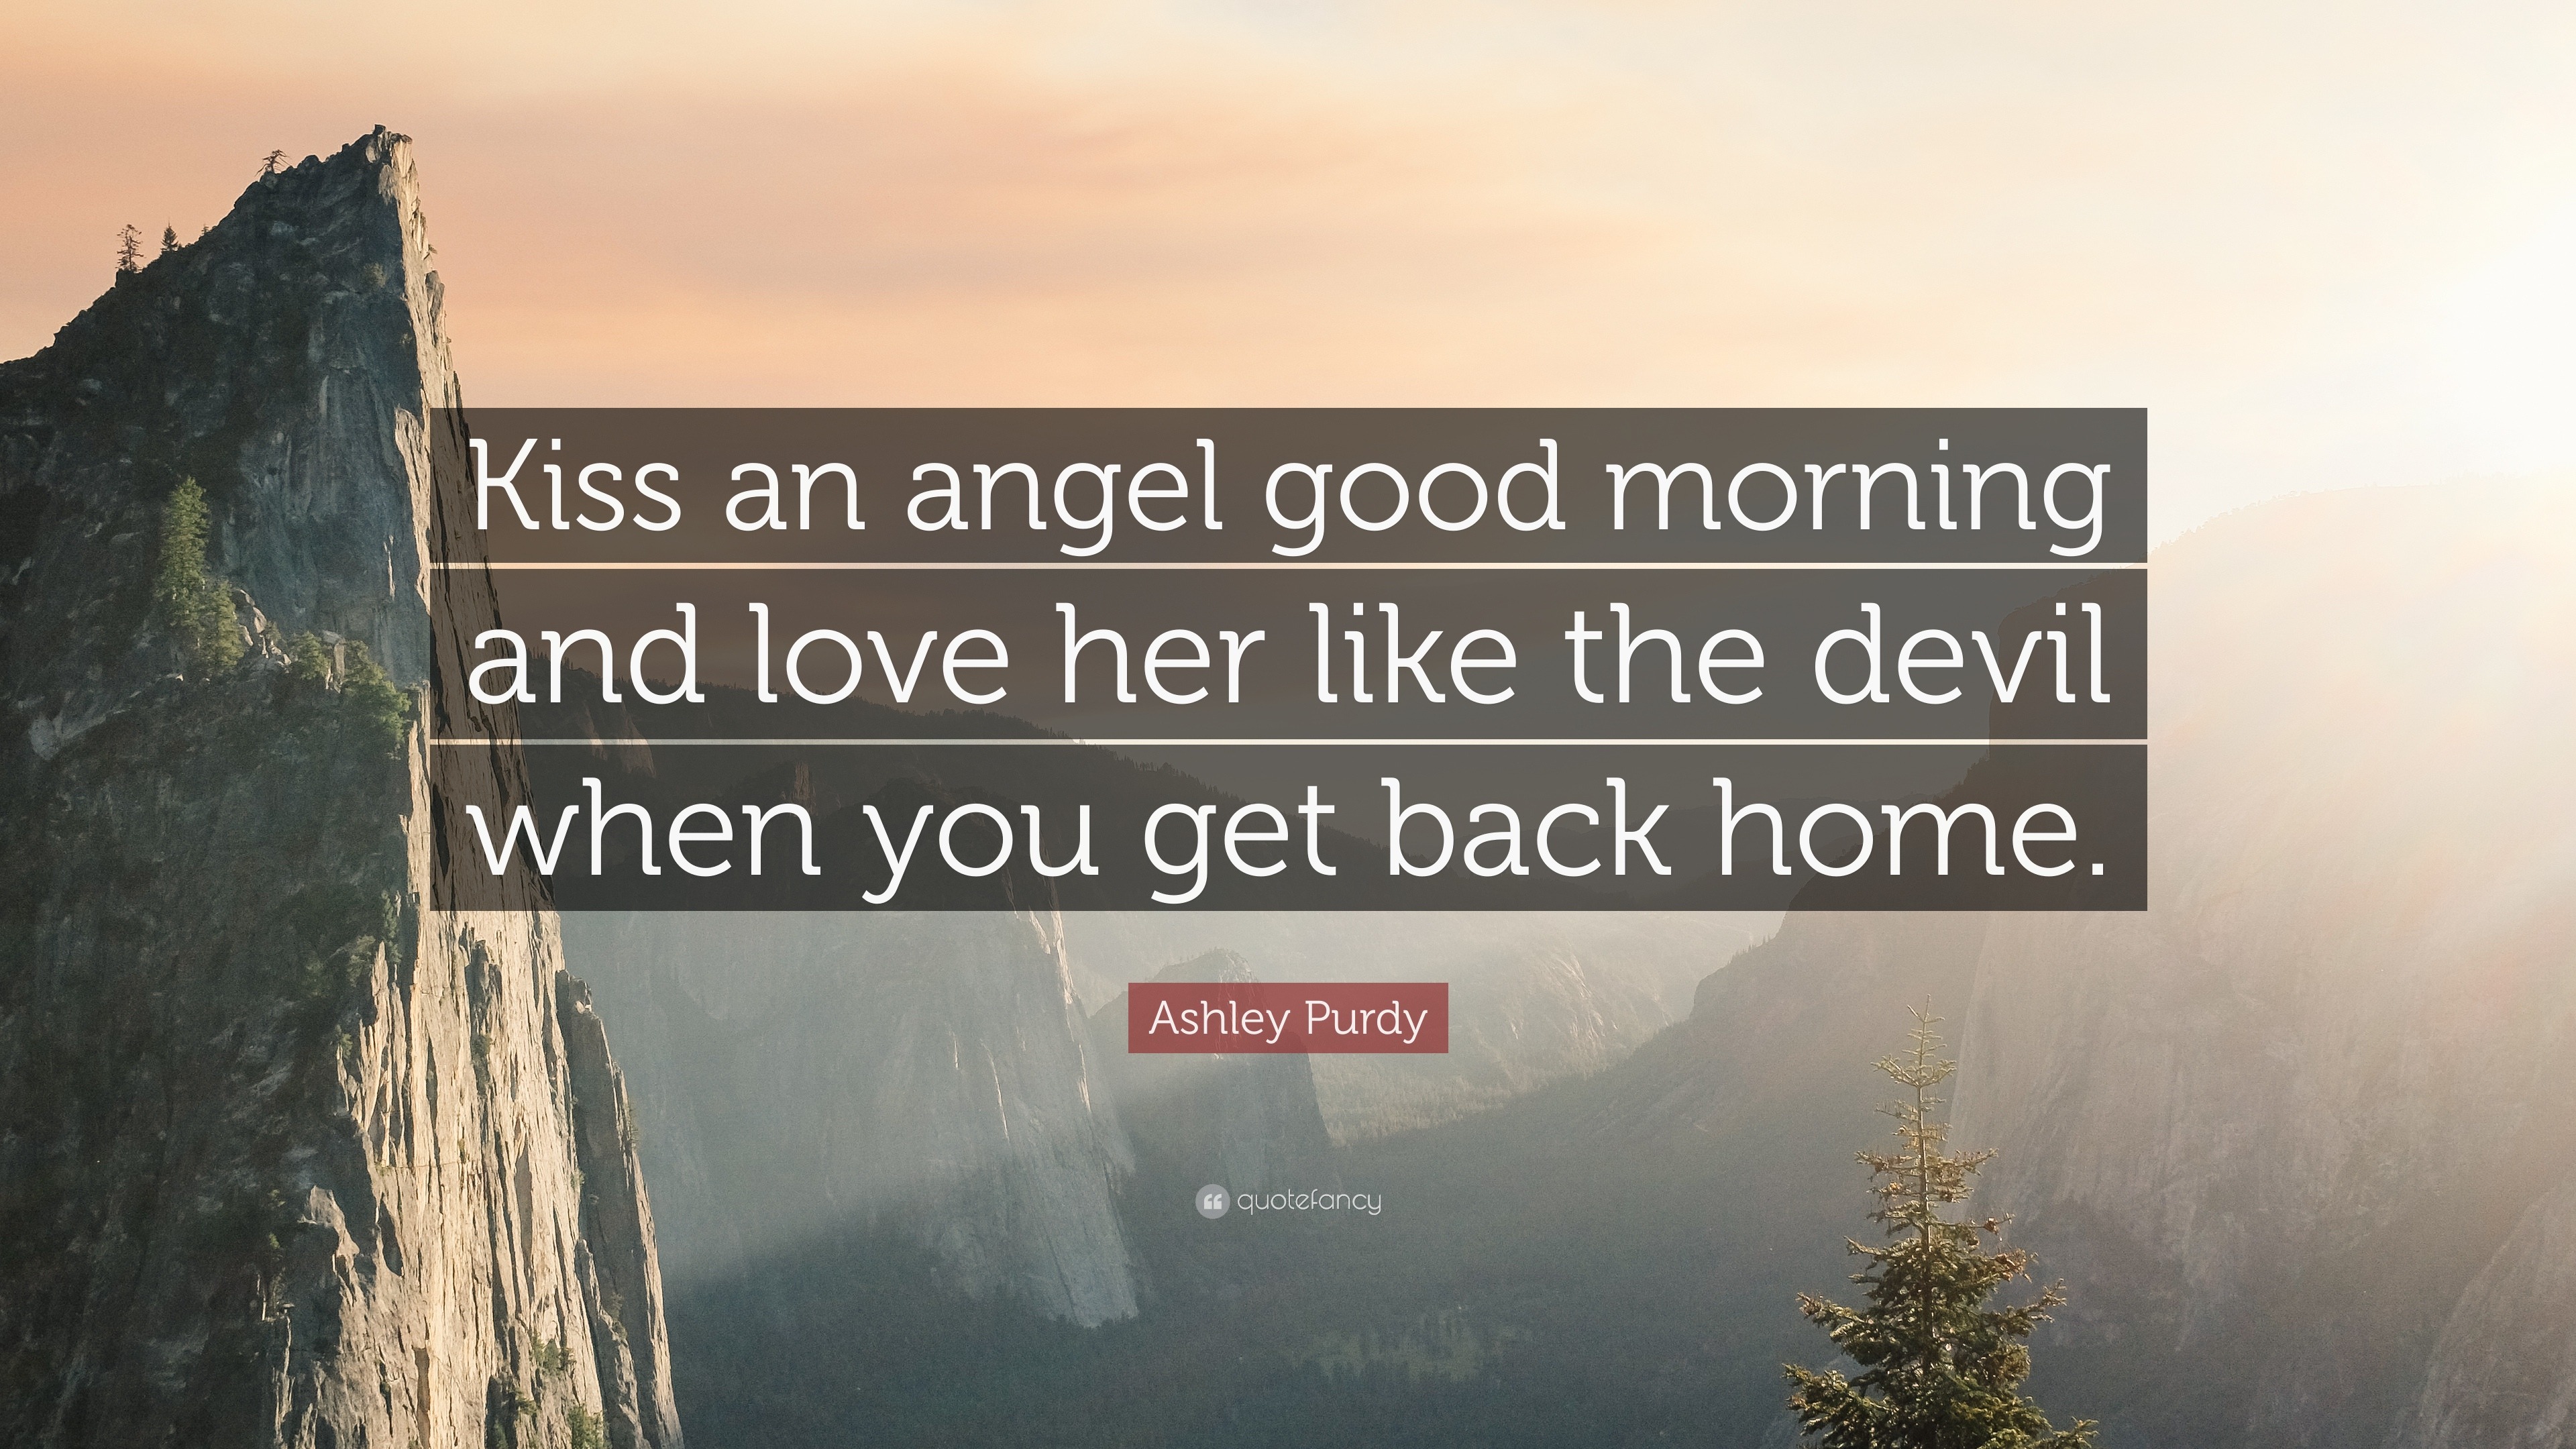 Ashley Purdy Quote “Kiss an angel good morning and love her like the devil